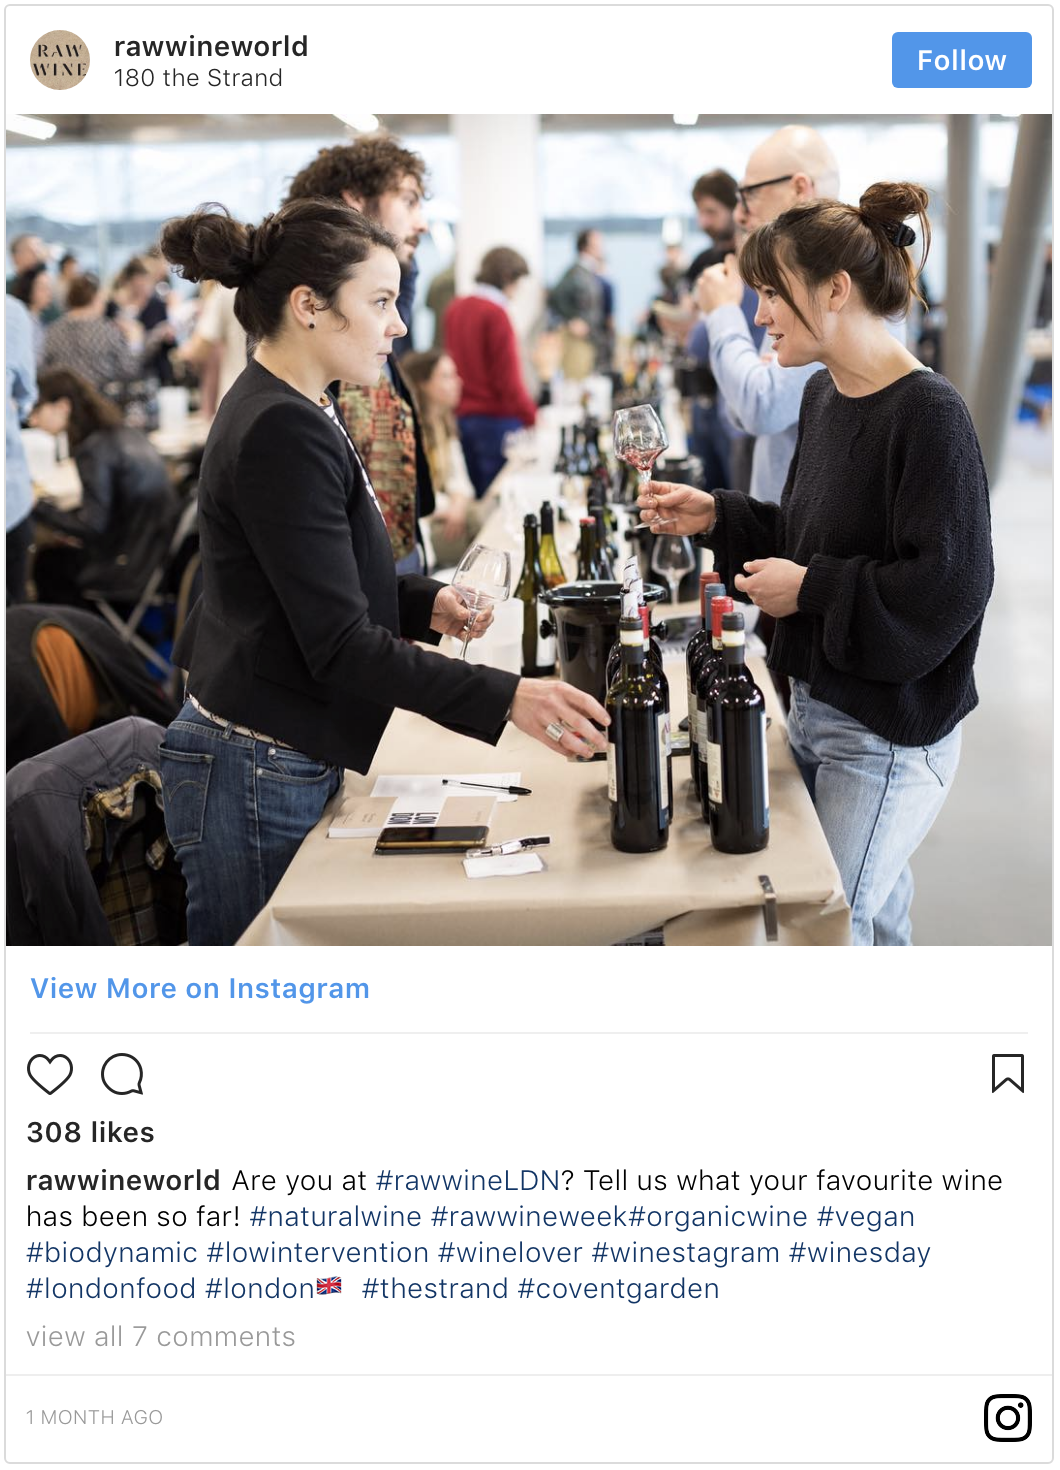 Woman in a black top with a big bun getting a pour of wine at a tasting event